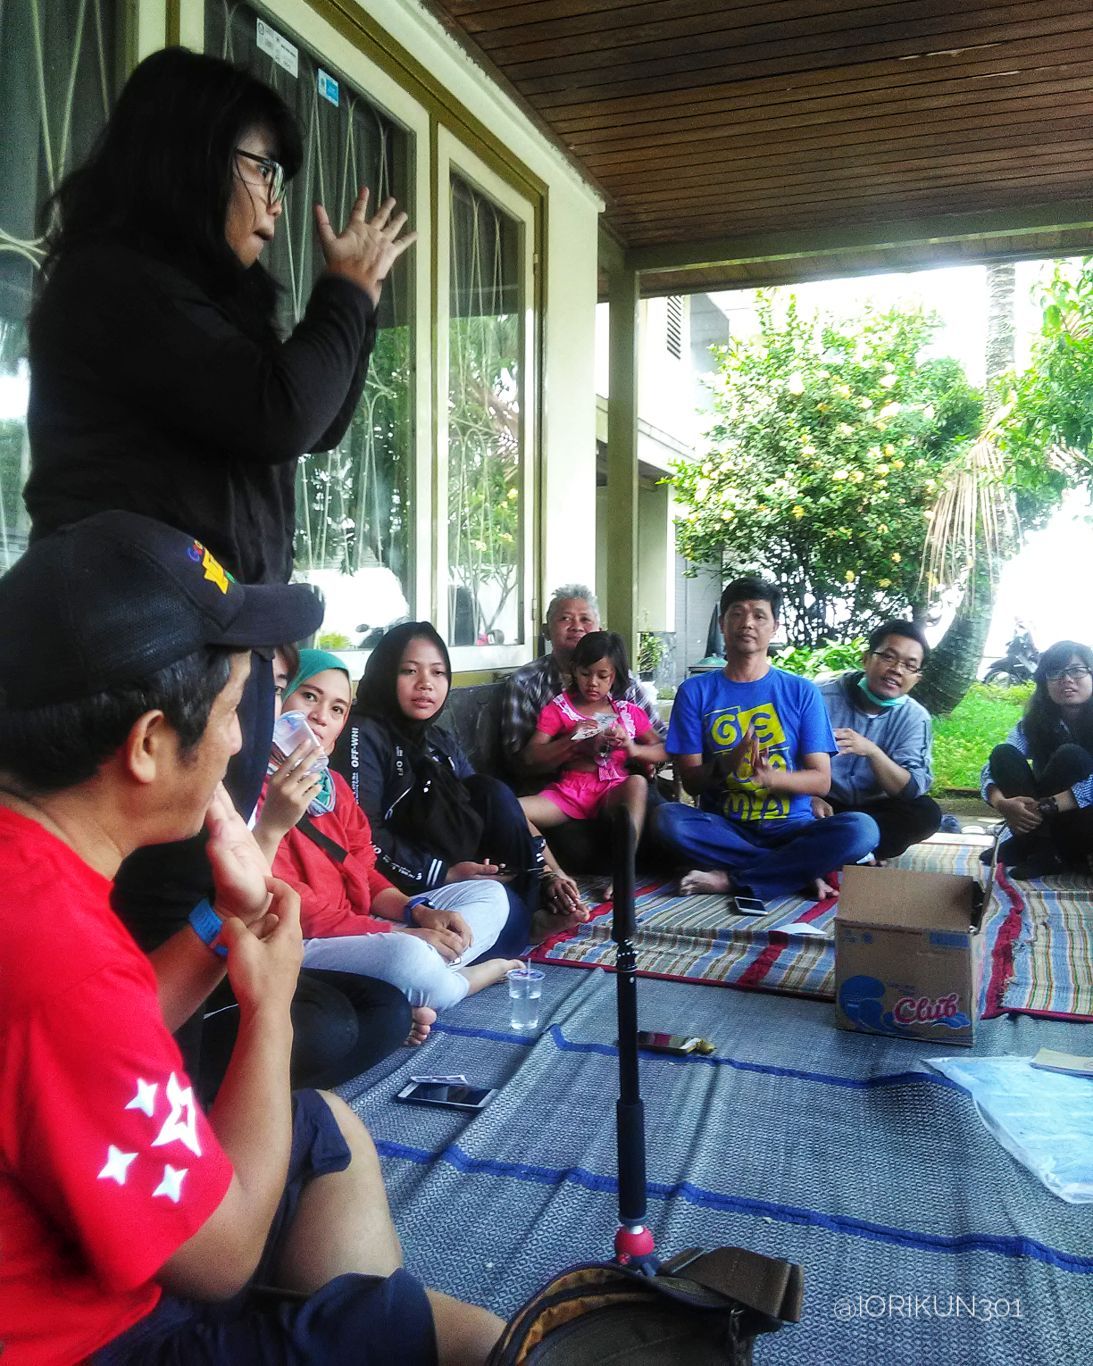 Mr. Brian (far left) explain how to use Google Maps while translated into Indonesian Sign Language by ms. Yanda (left standing)